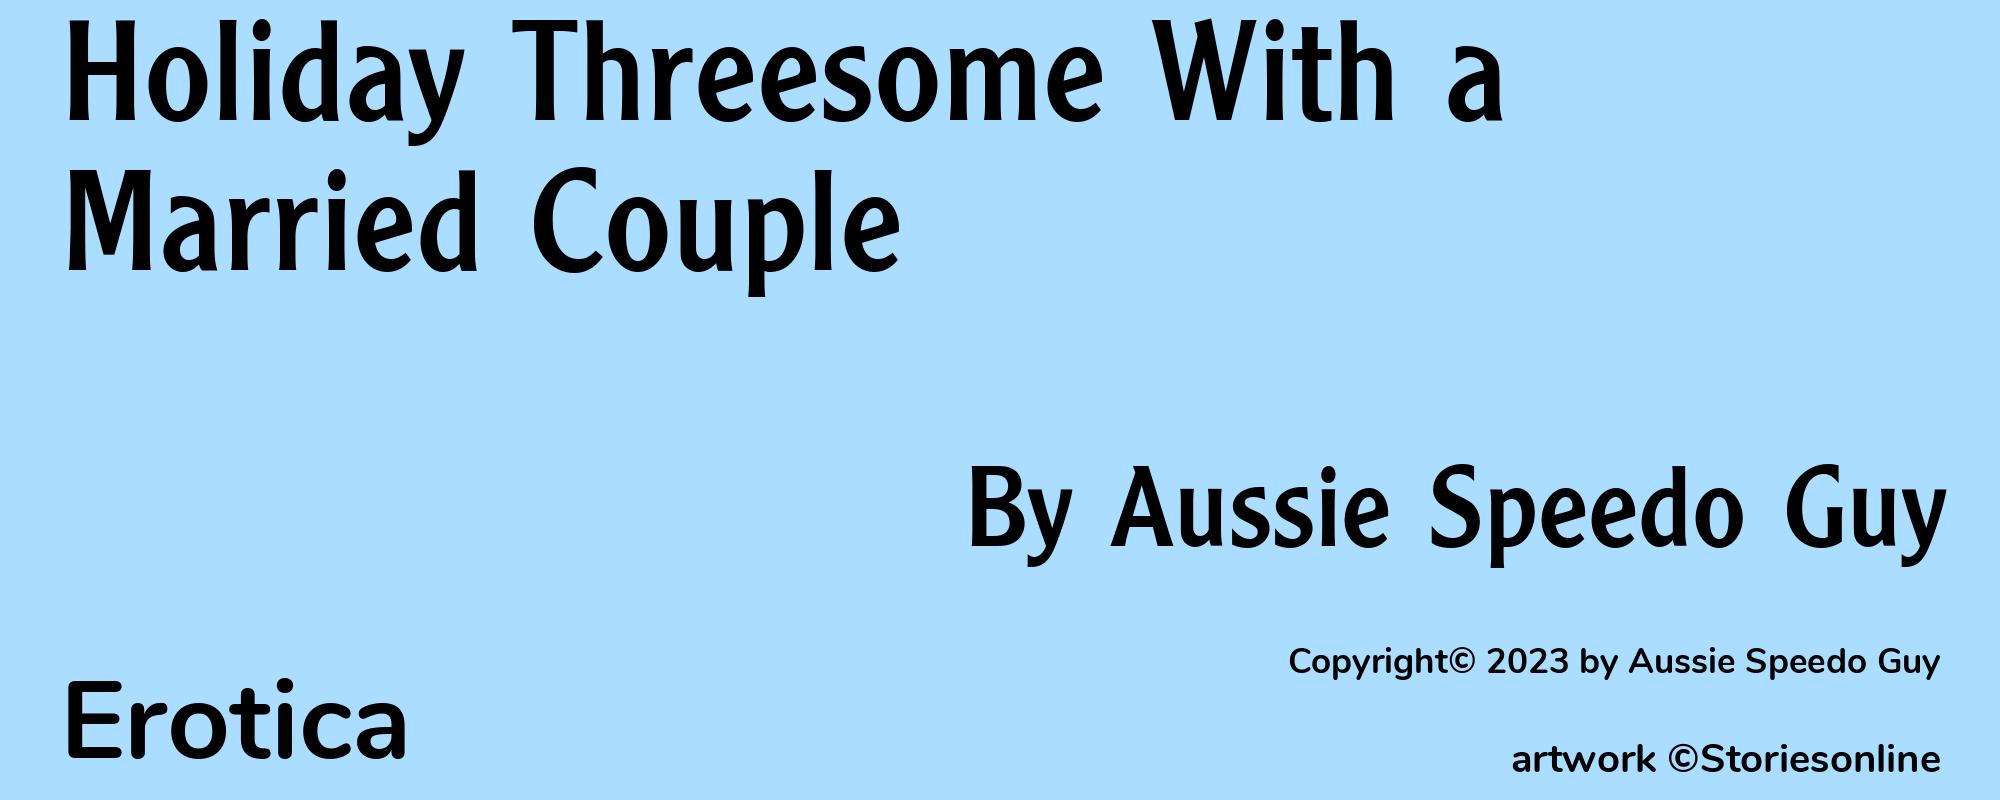 Holiday Threesome With a Married Couple - Cover